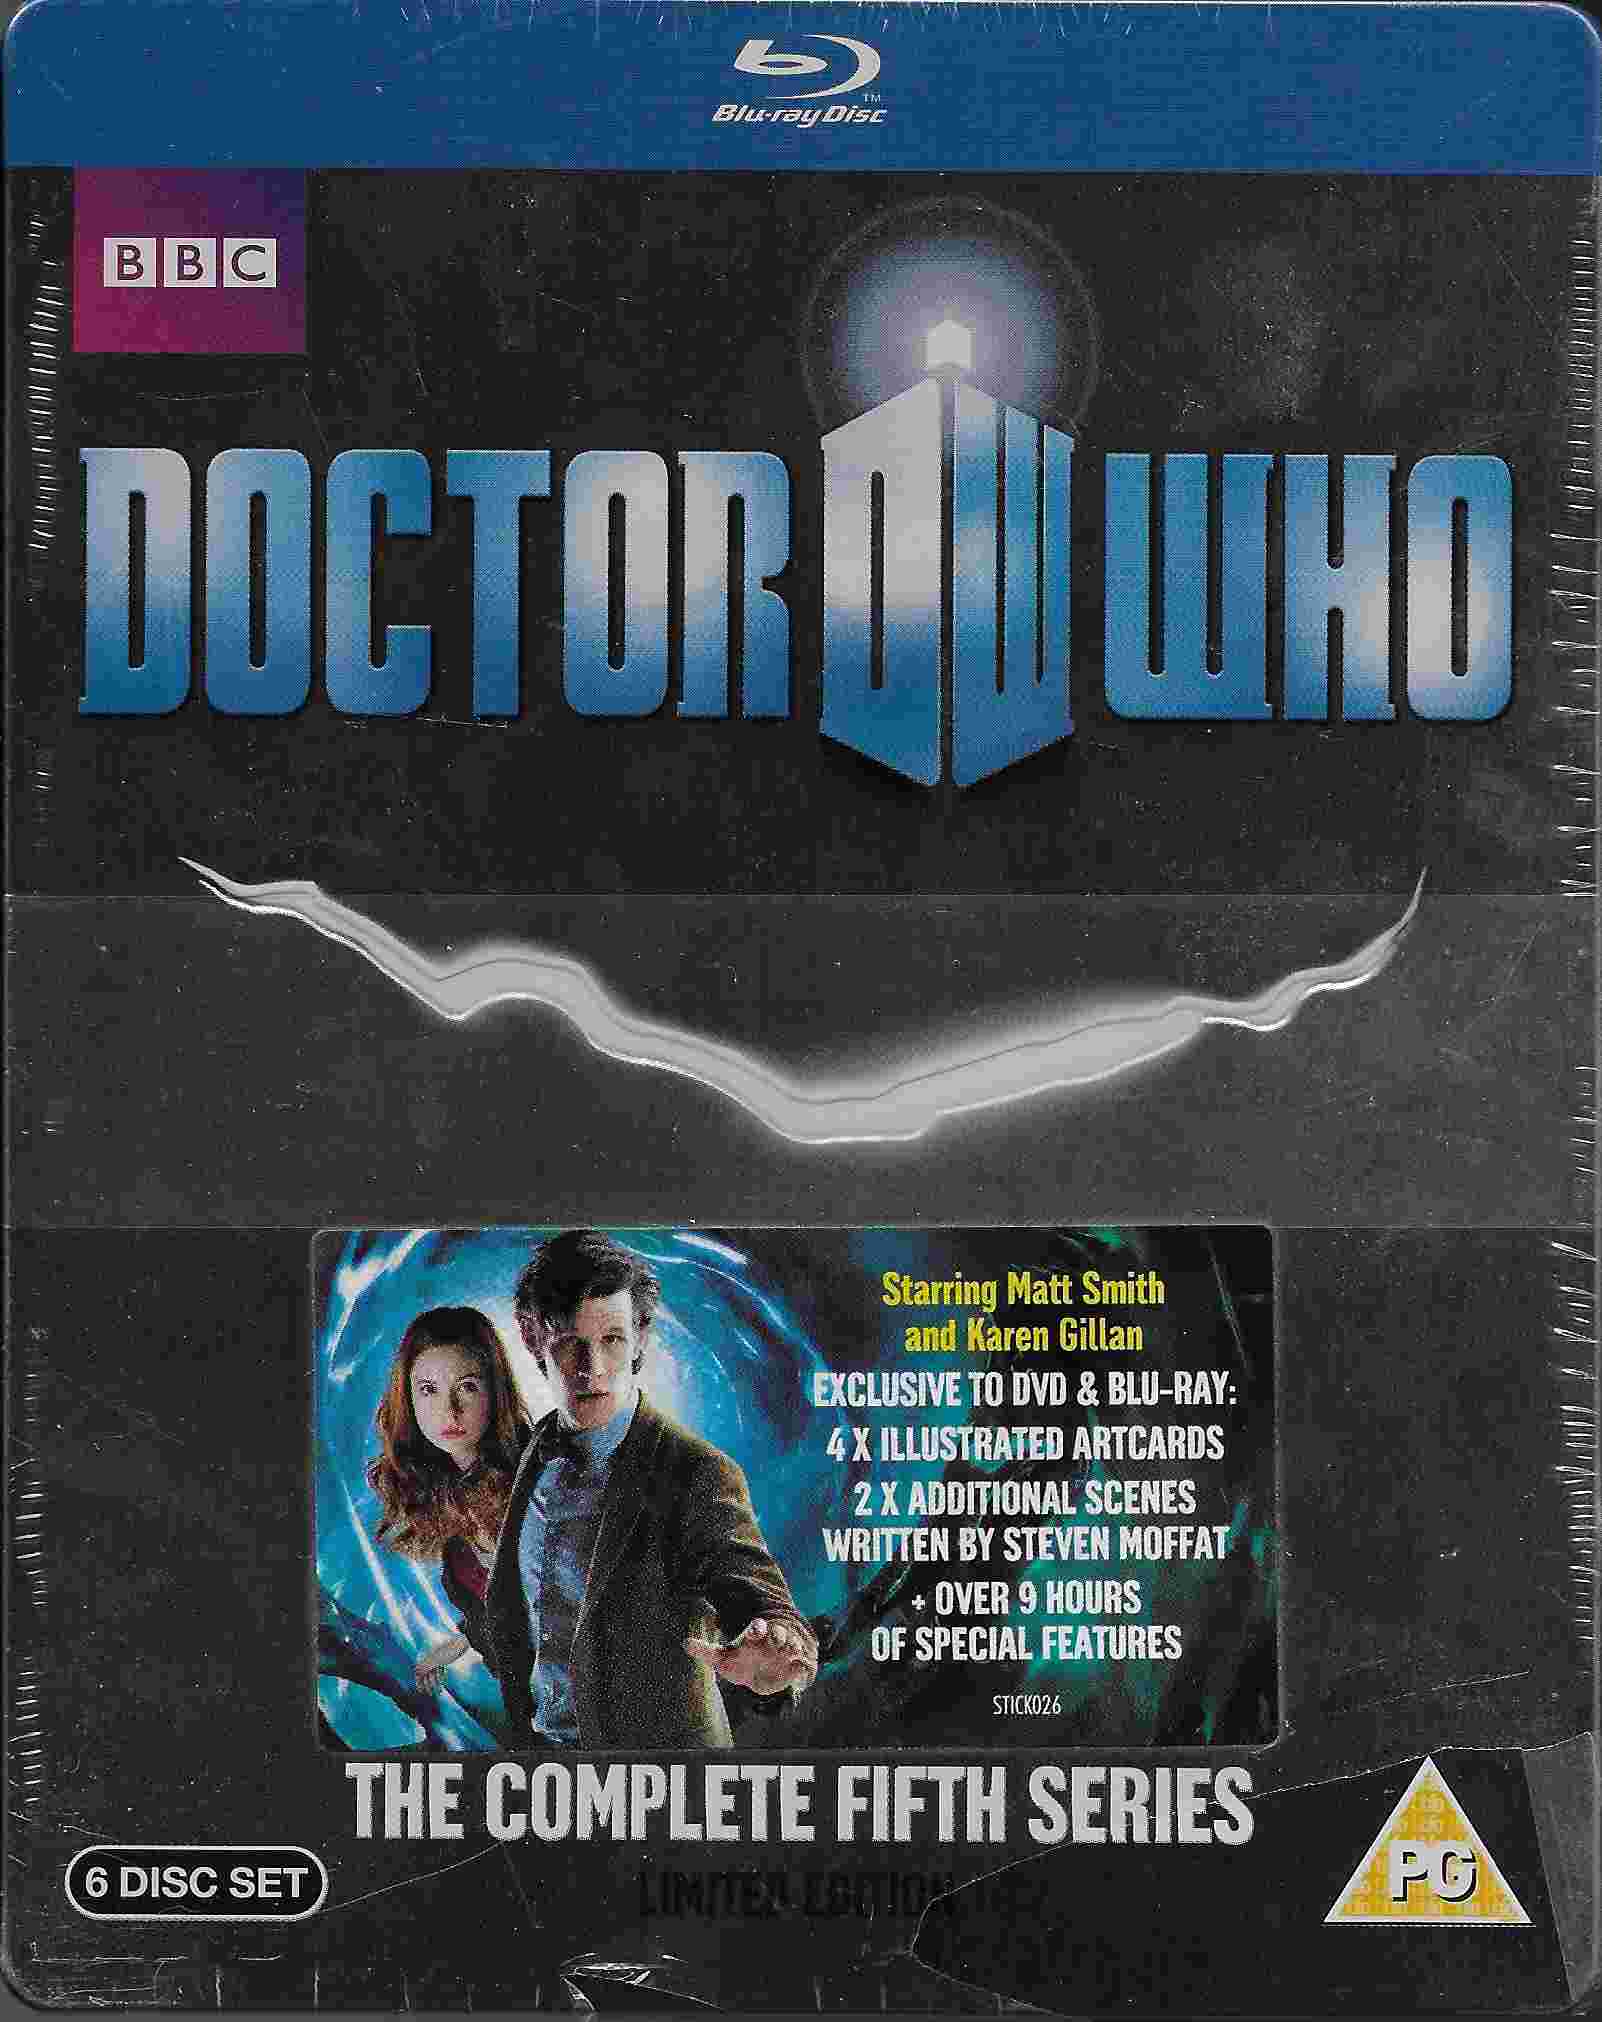 Picture of BBCBD 0130 Doctor Who - The complete fifth series by artist Various from the BBC blu-rays - Records and Tapes library